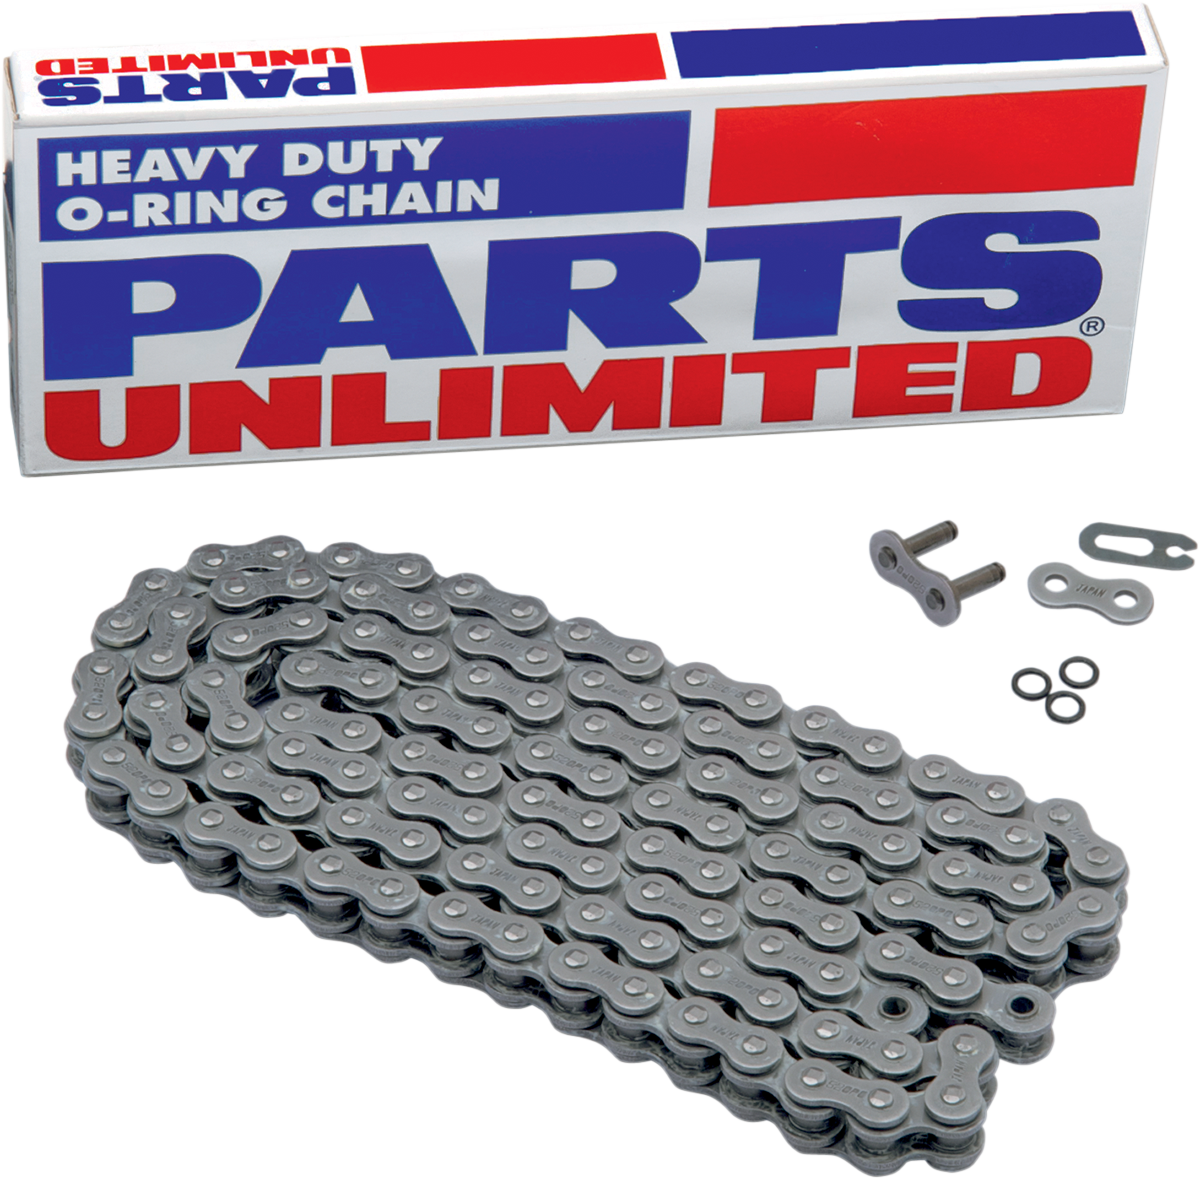 PARTS UNLIMITED-CHAIN MOTORCYCLE CHAIN CHAIN PU 520 O-RNG X 114L